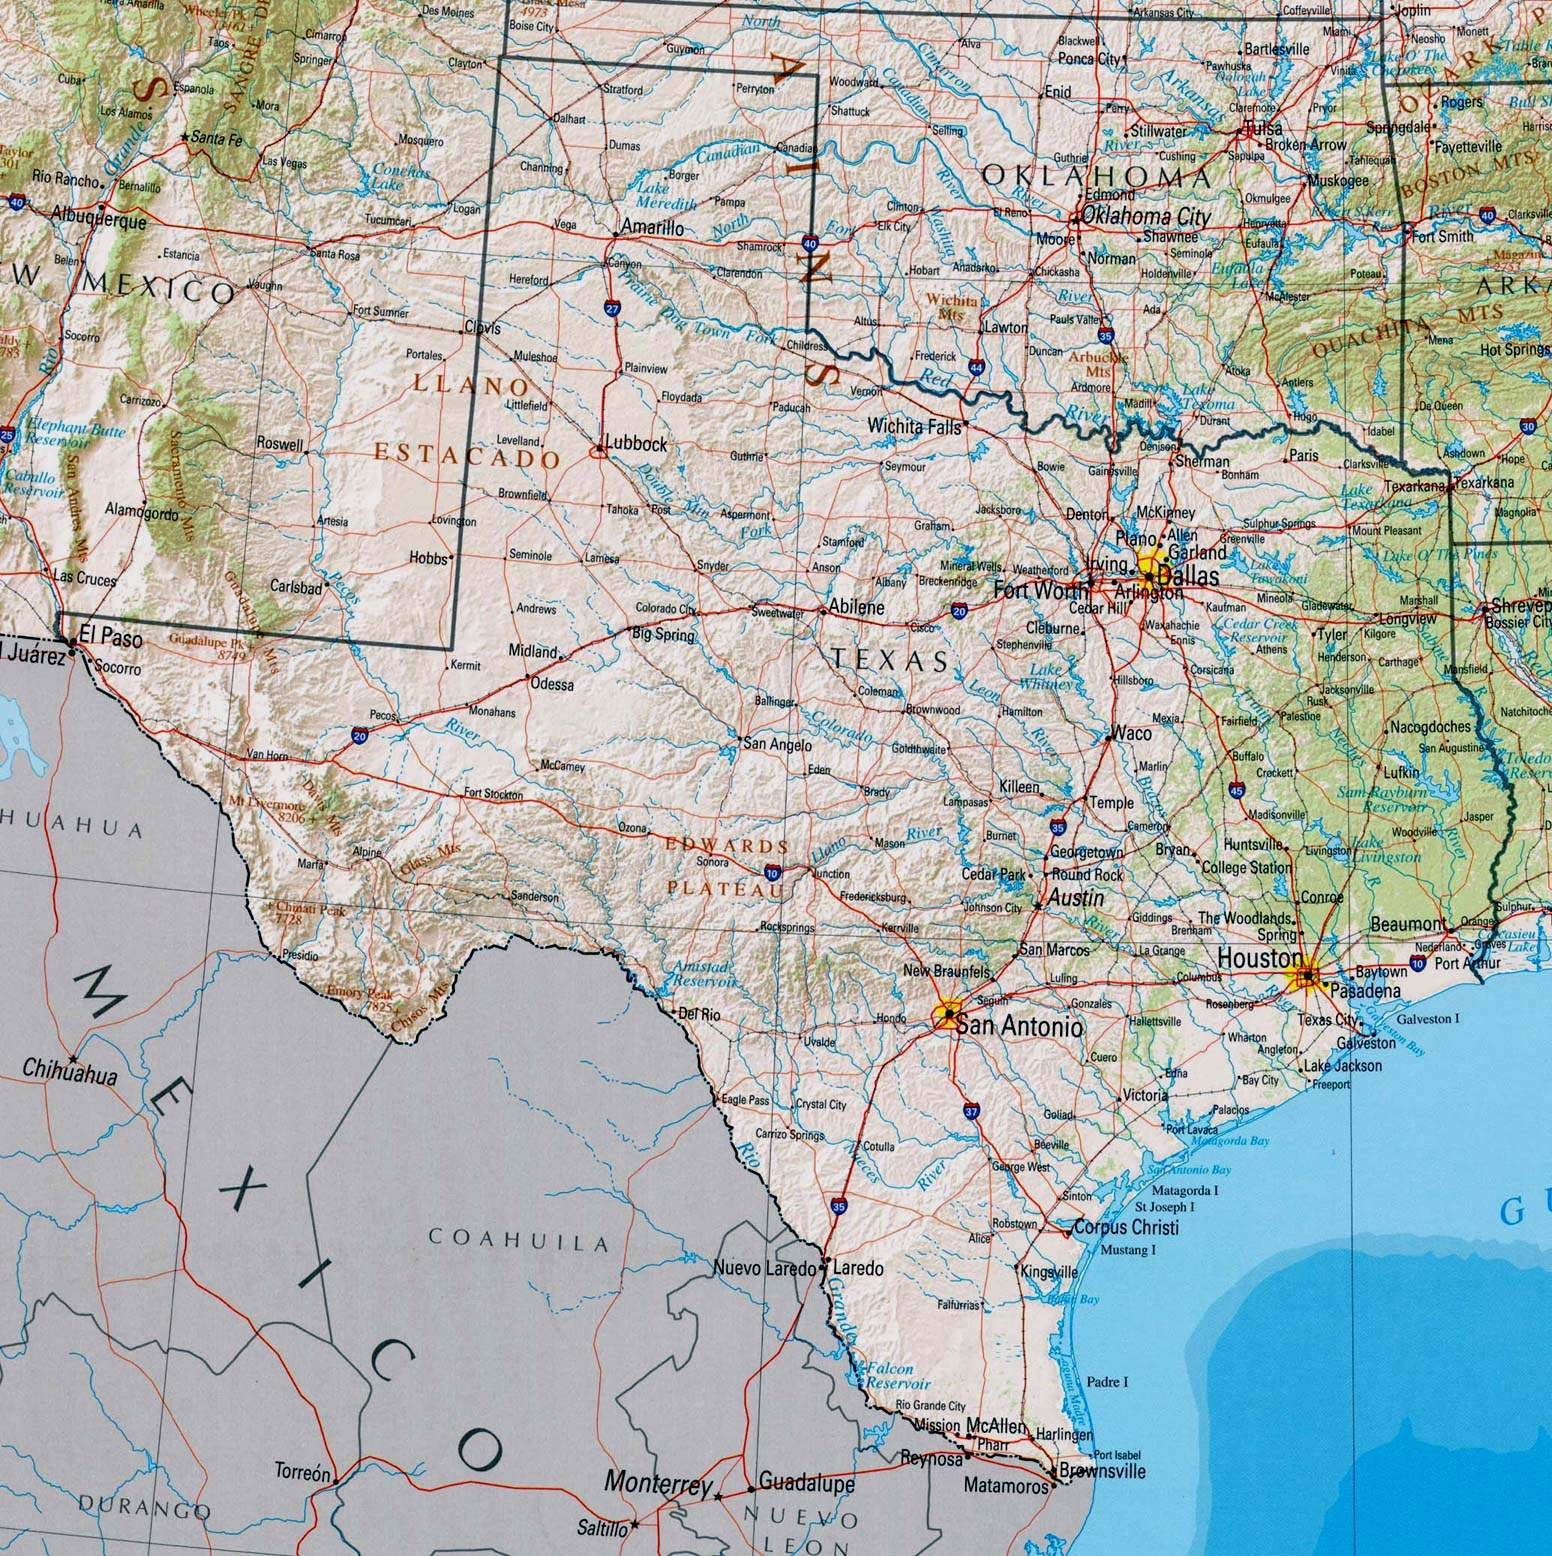 Large Texas Maps For Free Download And Print | High-Resolution And - Texas Ghost Towns Map